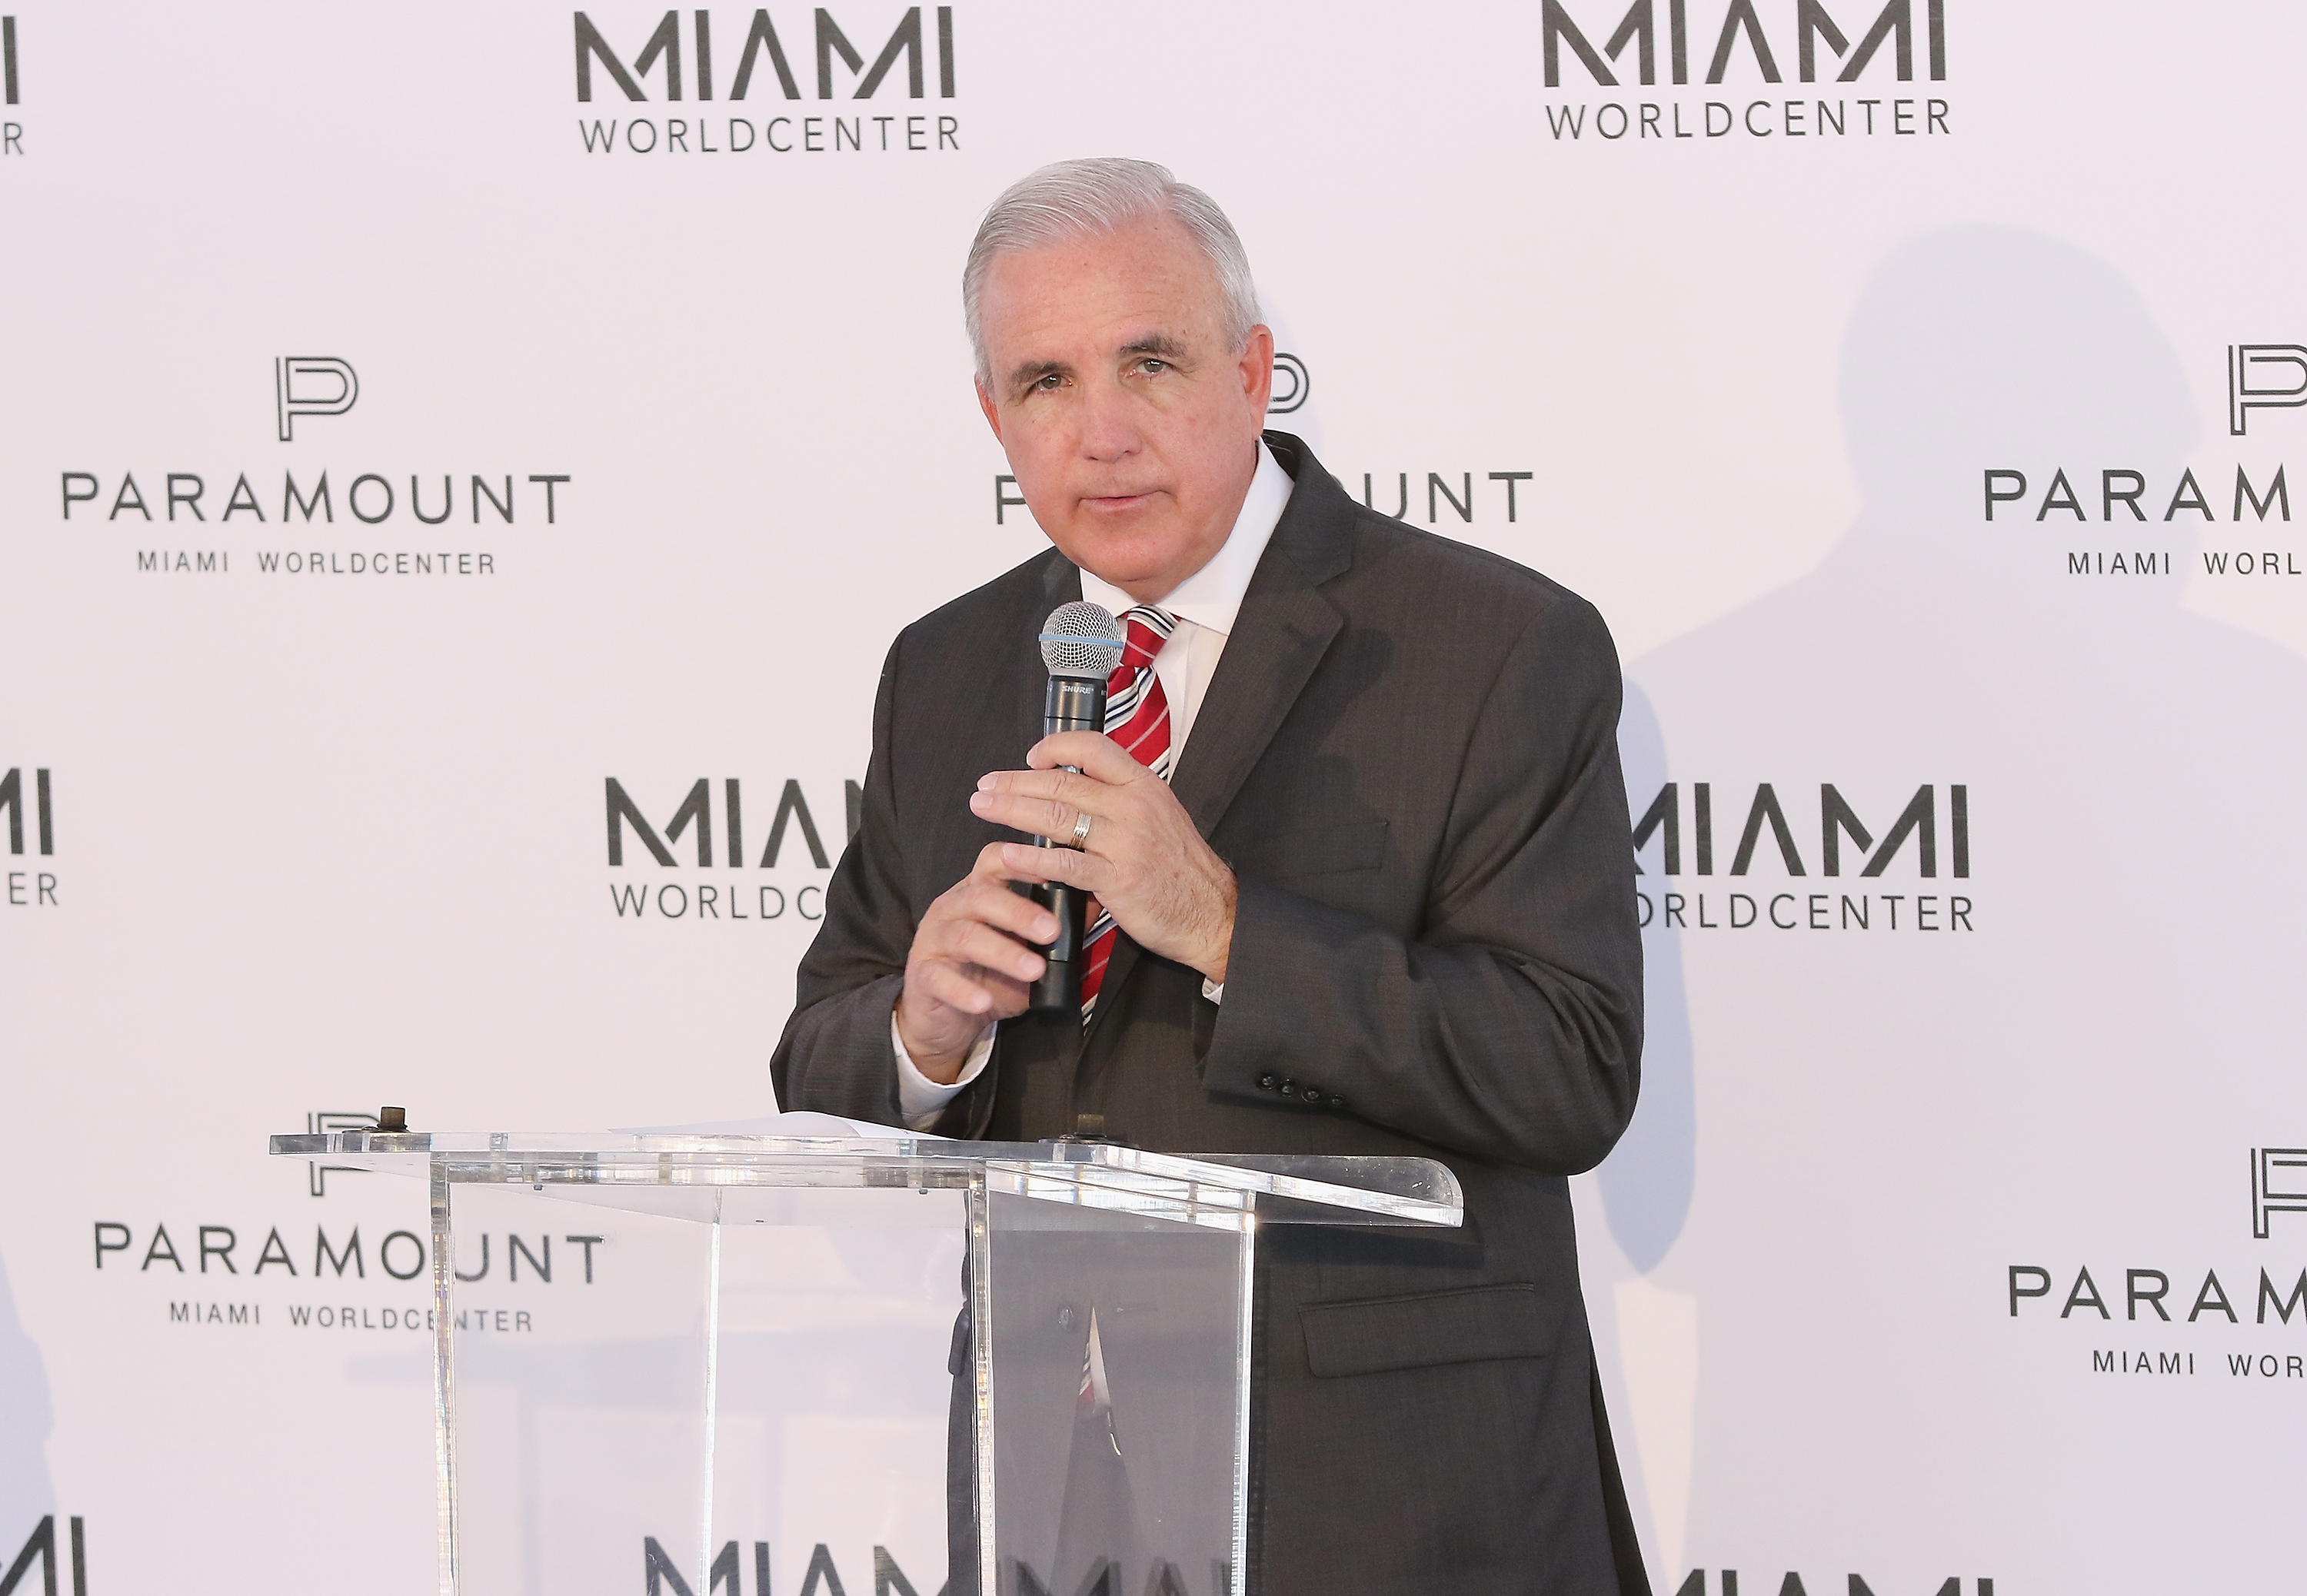 MIAMI, FL - MARCH 03: Miami Dade County Mayor Carlos Gimenez is seen at the Miami Worldcenter & Paramount Groundbreaking Ceremony on March 3, 2016 in Miami, Florida.   Alexander Tamargo/Getty Images for World Satellite Television News/AFP